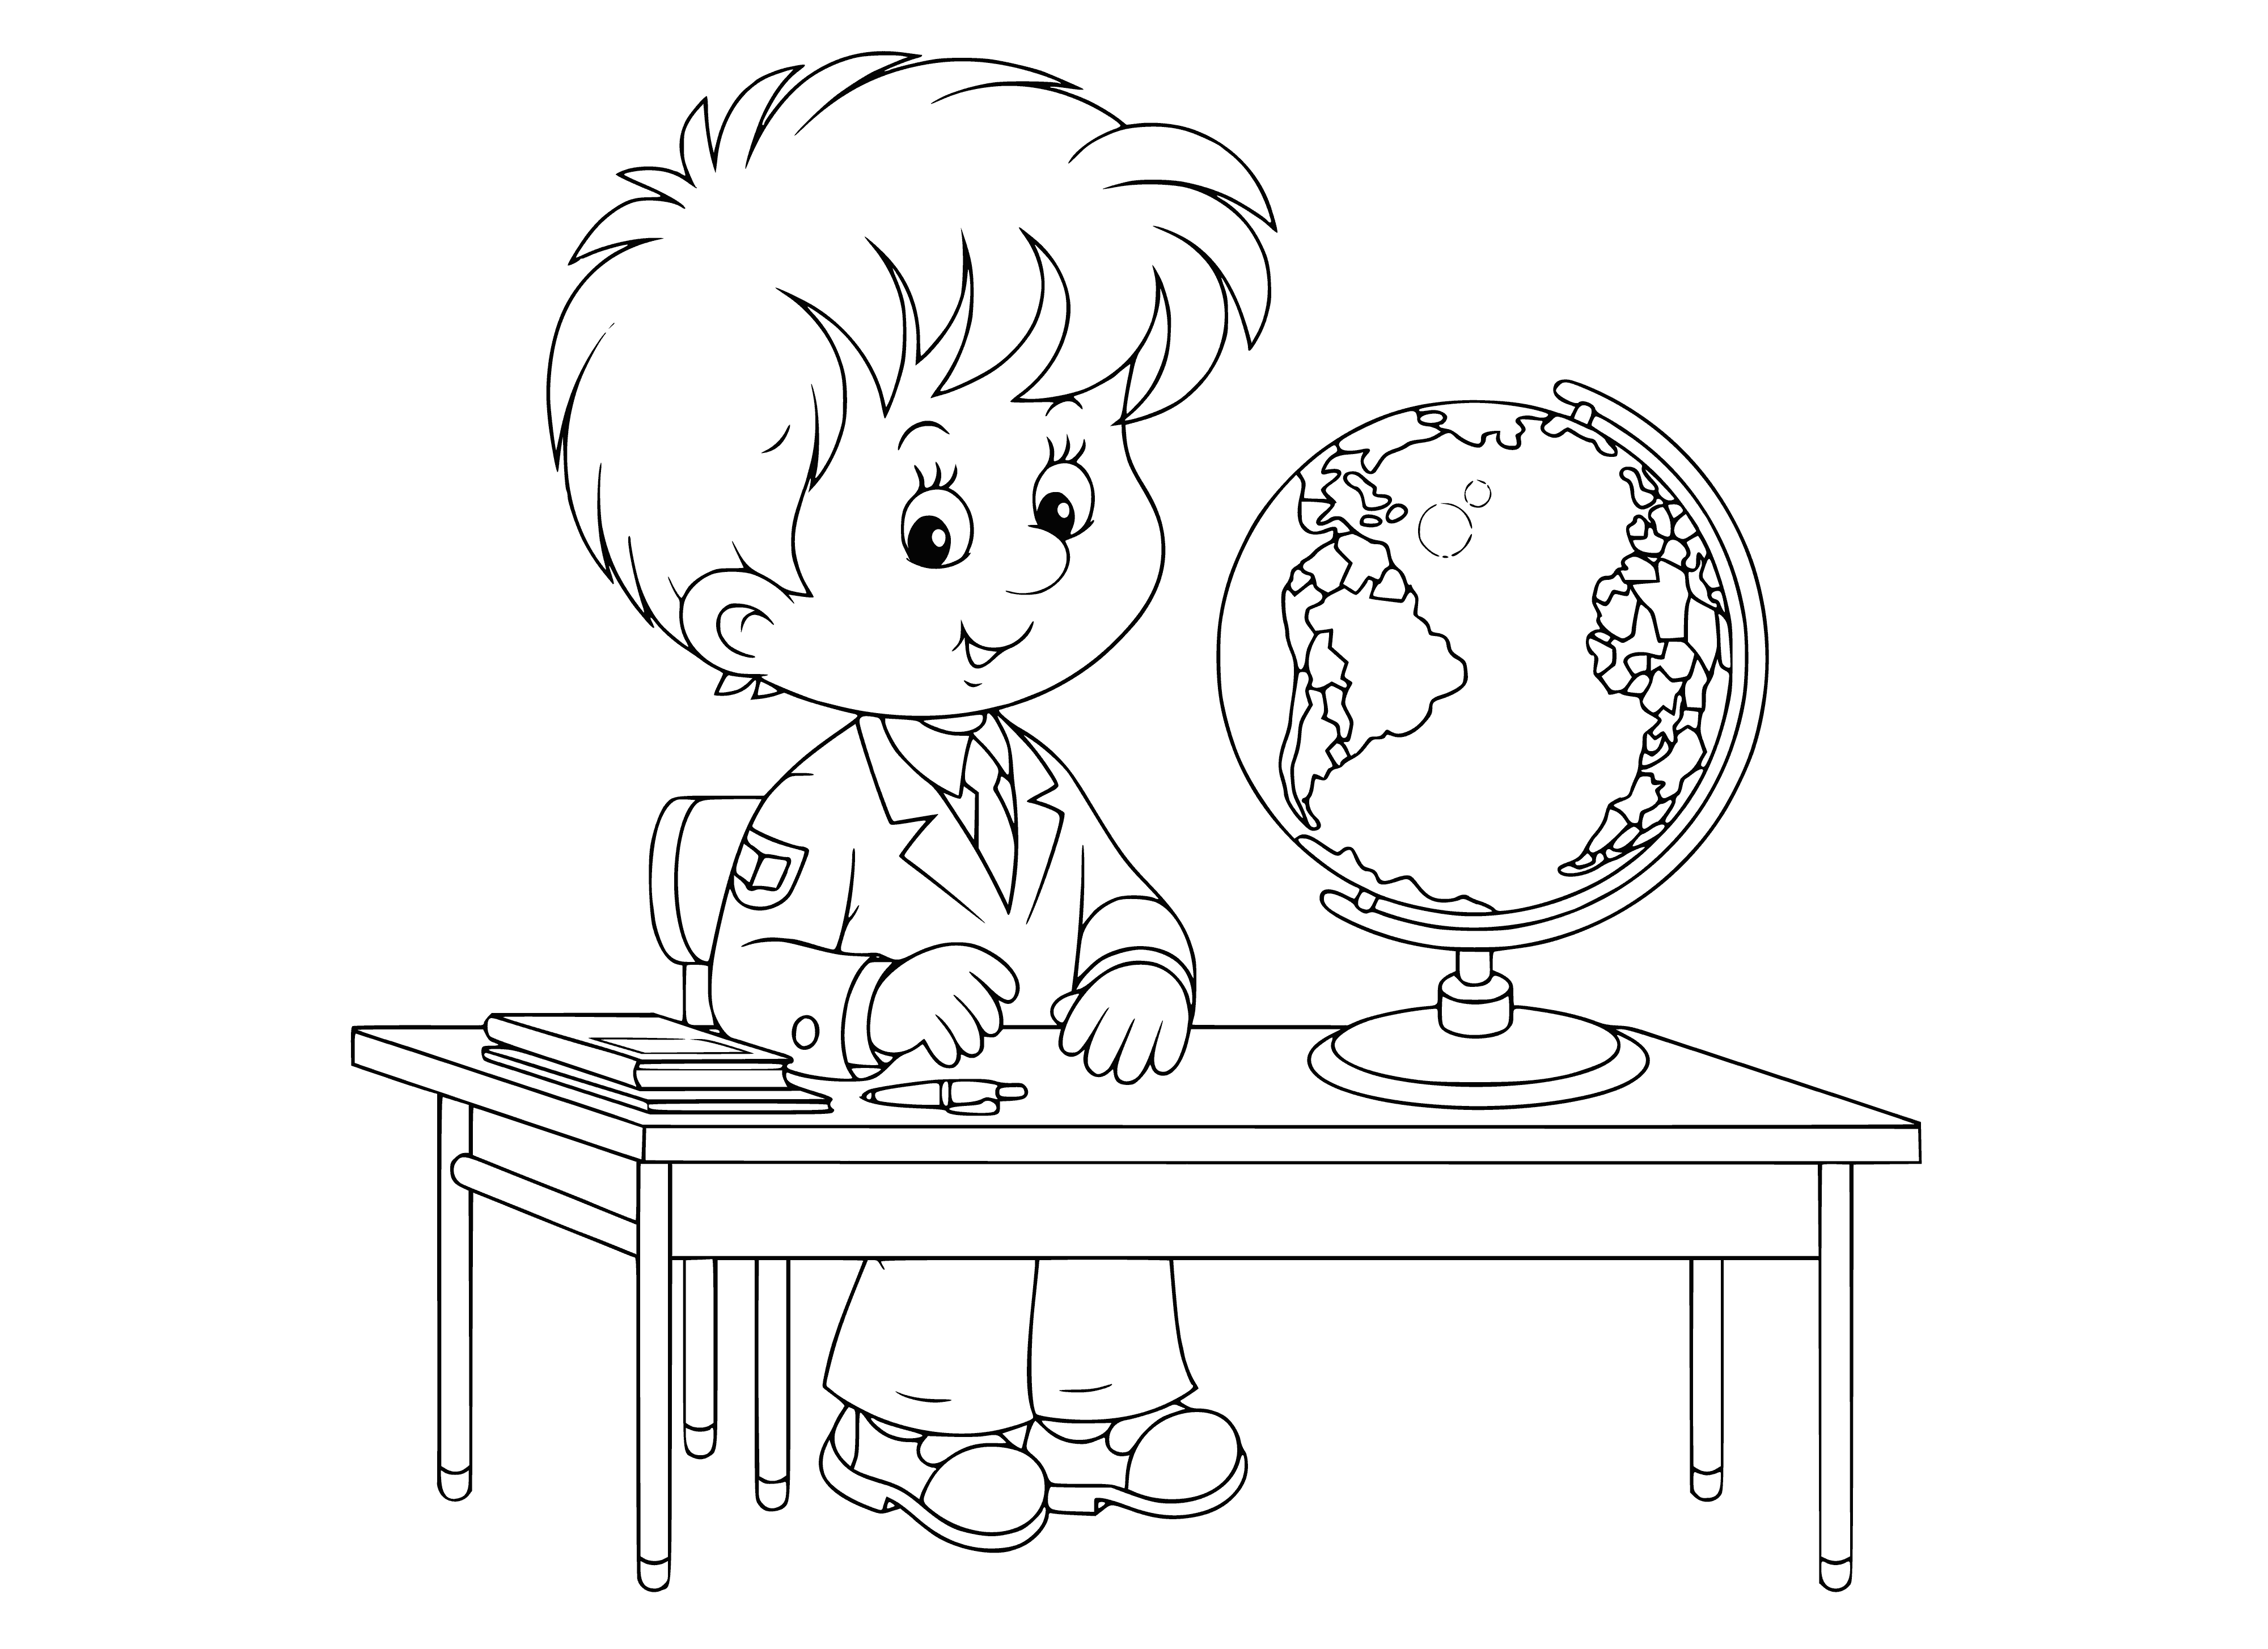 Student at the desk coloring page